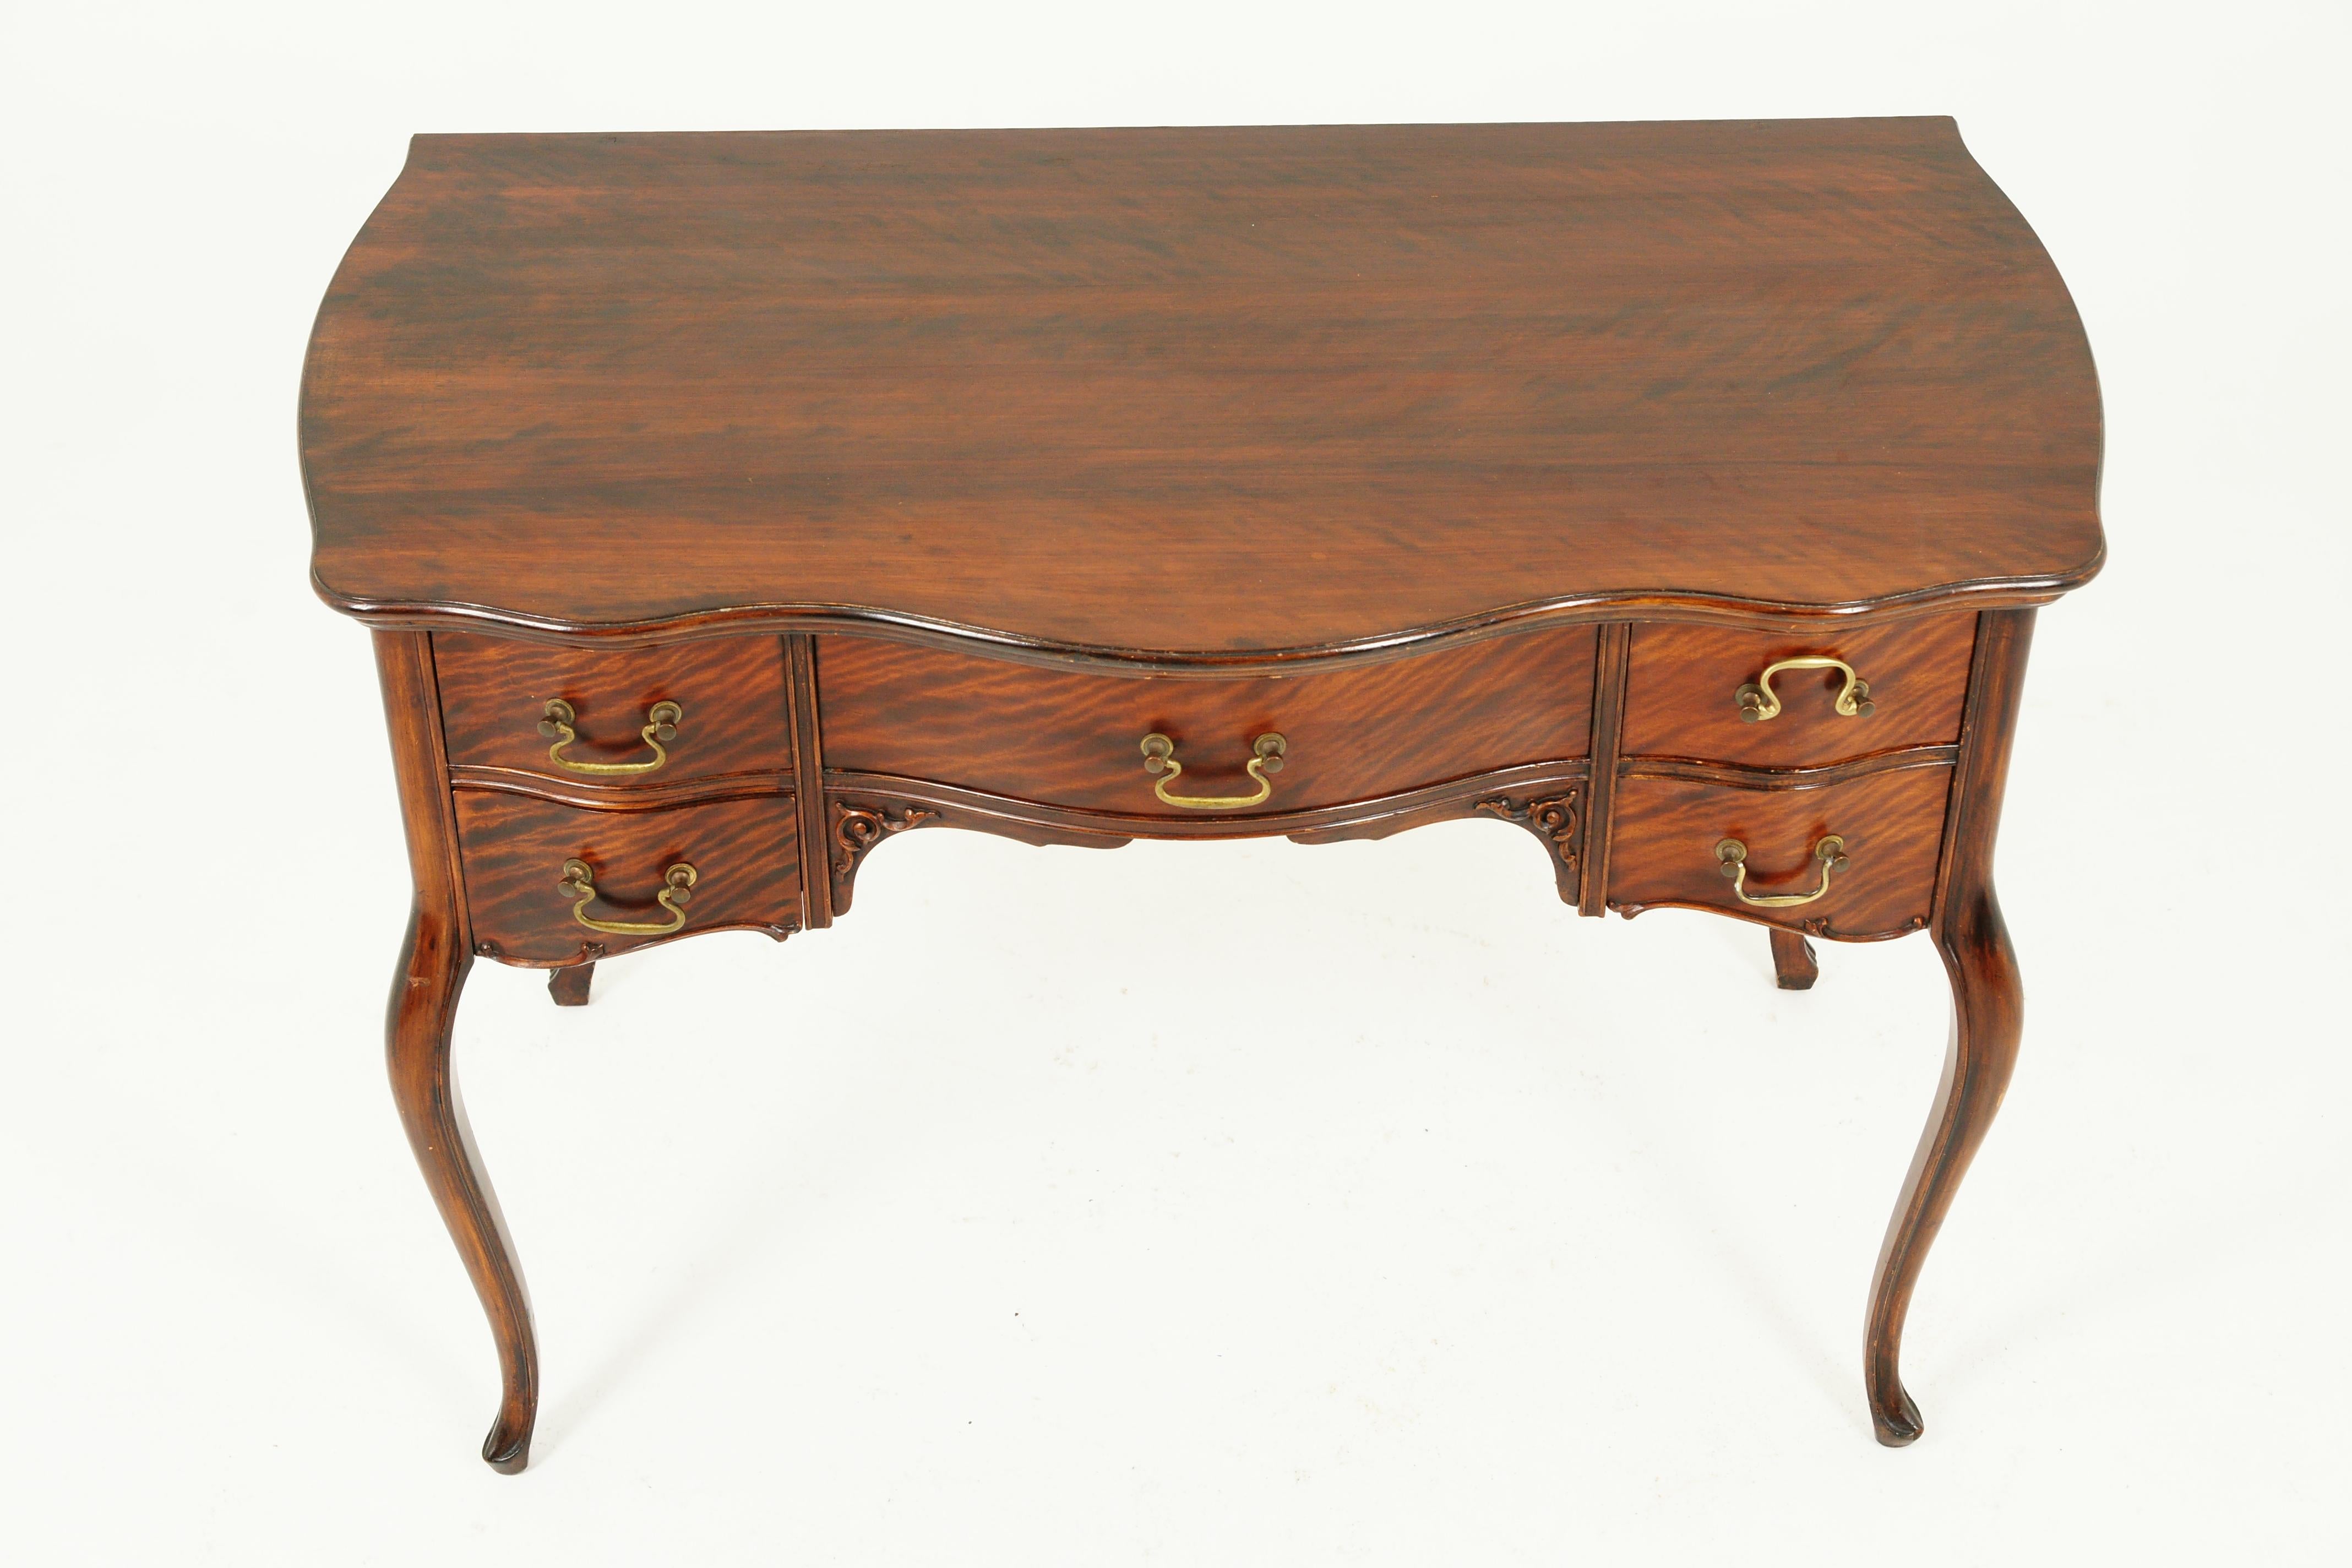 Antique Victorian Serpentine front writing table, Vanity, American 1900, B2534

American 1900
Solid walnut
Original finish
Serpentine top
Single bow front drawer
Flanked by a pair of small drawers on each side
Original brass pulls
All